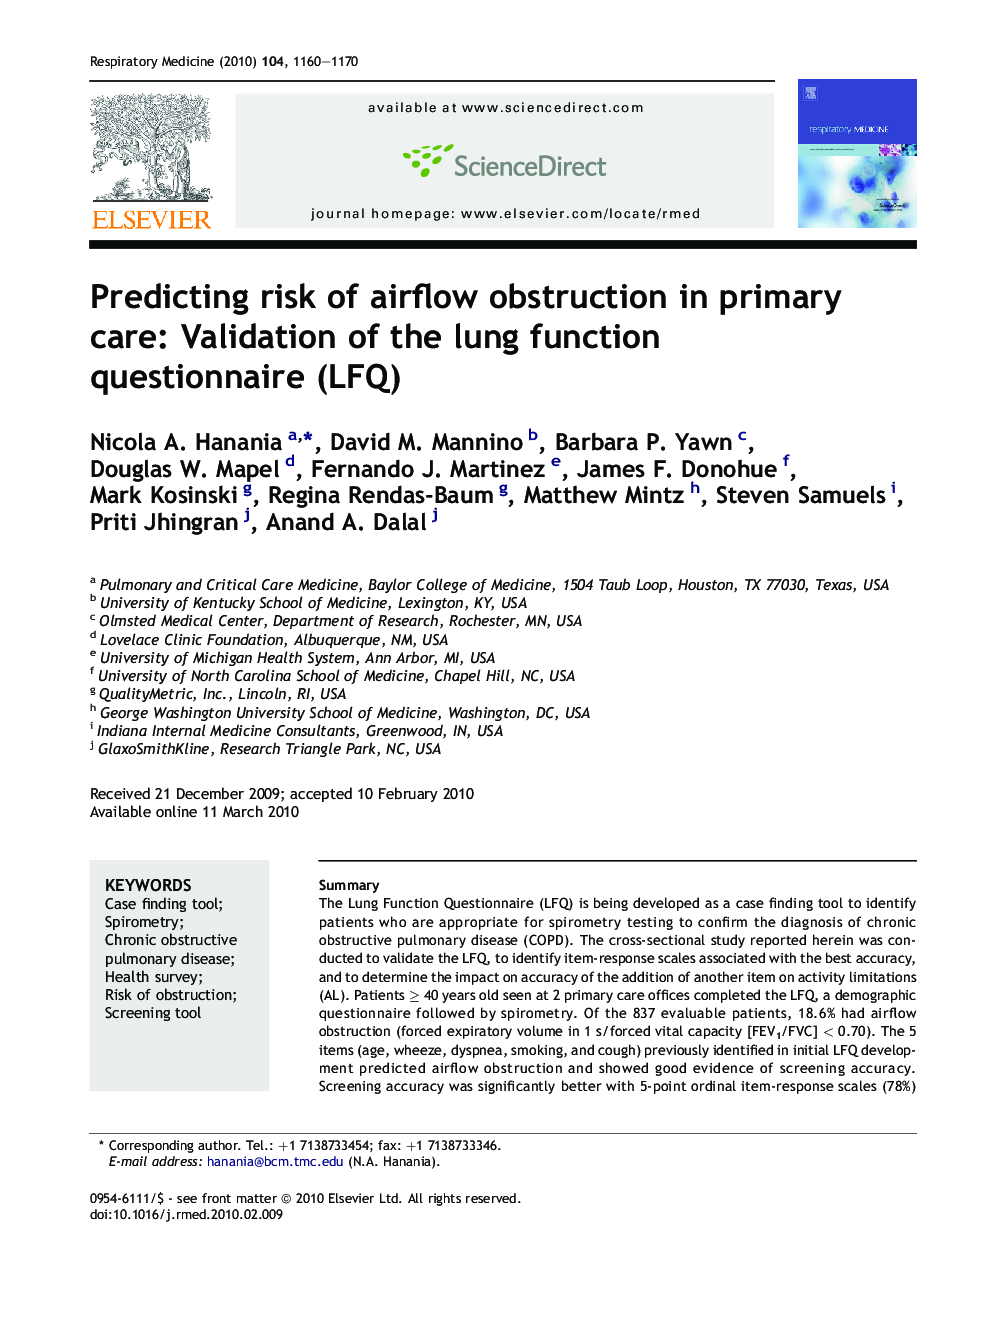 Predicting risk of airflow obstruction in primary care: Validation of the lung function questionnaire (LFQ)